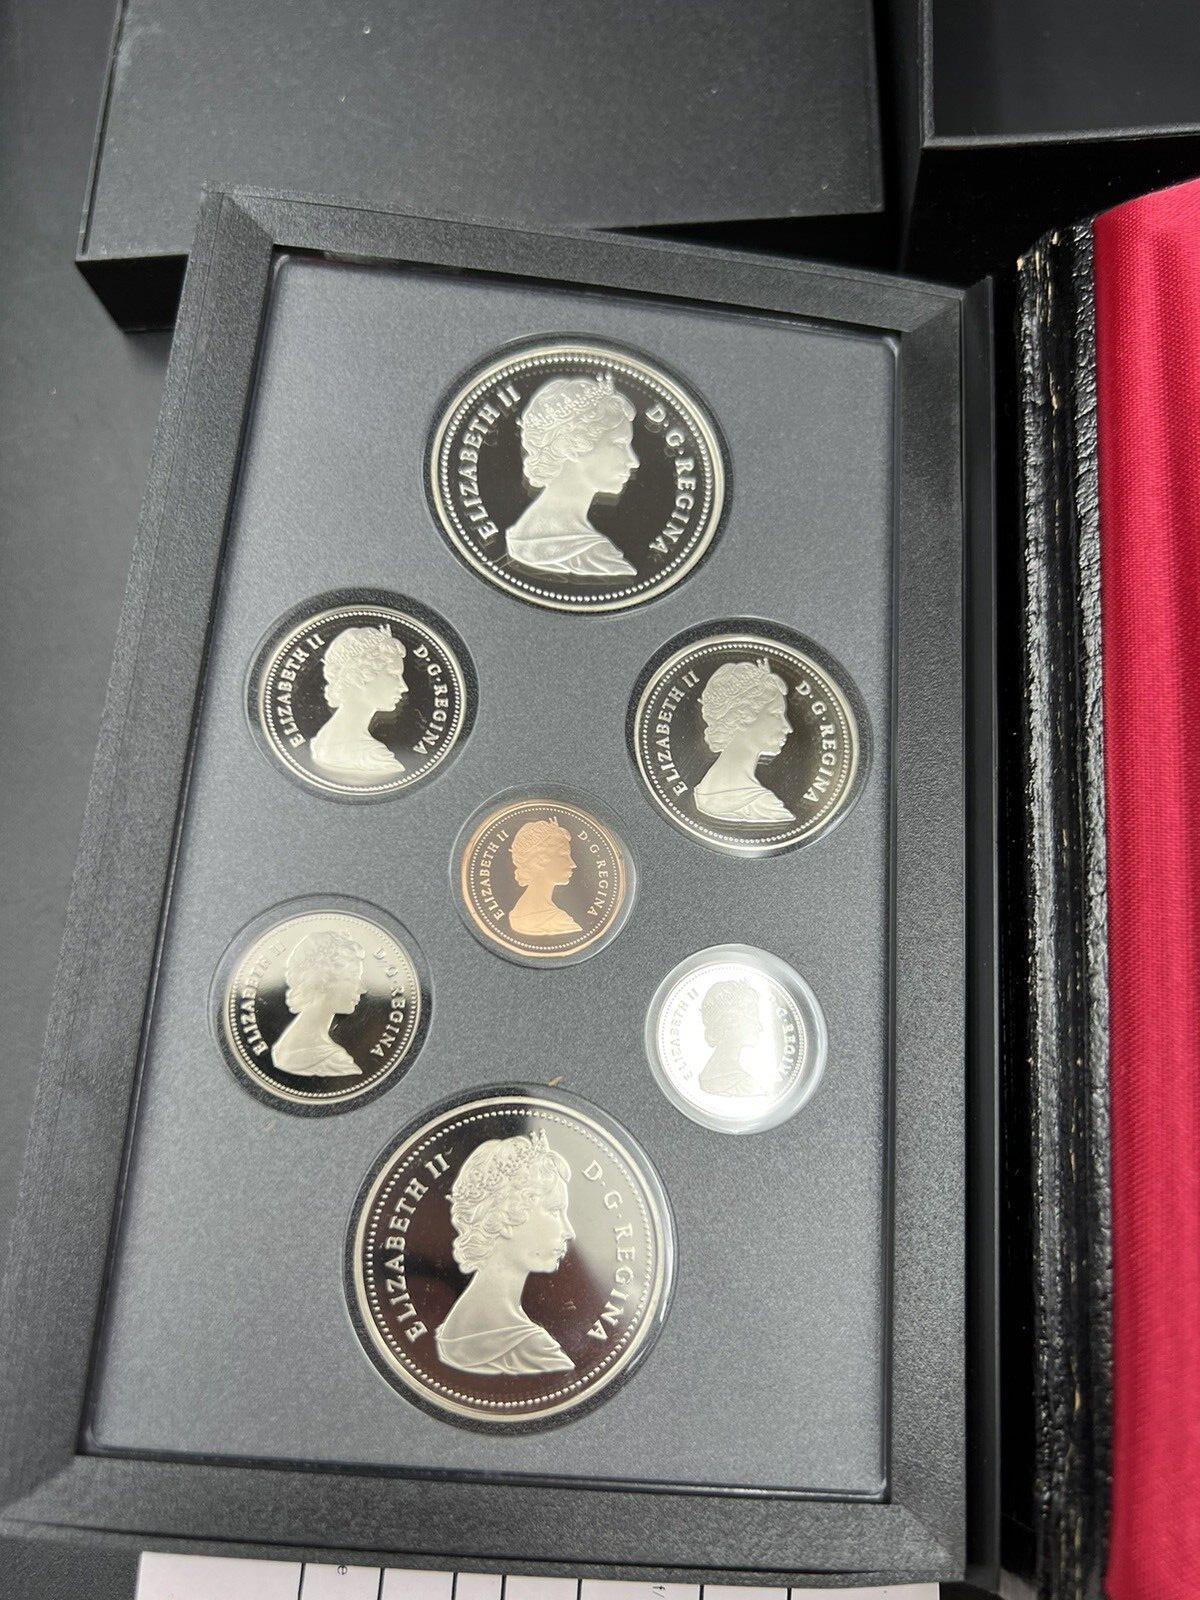 1986 Canada Double Dollar Proof Set Royal Canadian Mint RCM OGP in plastic case